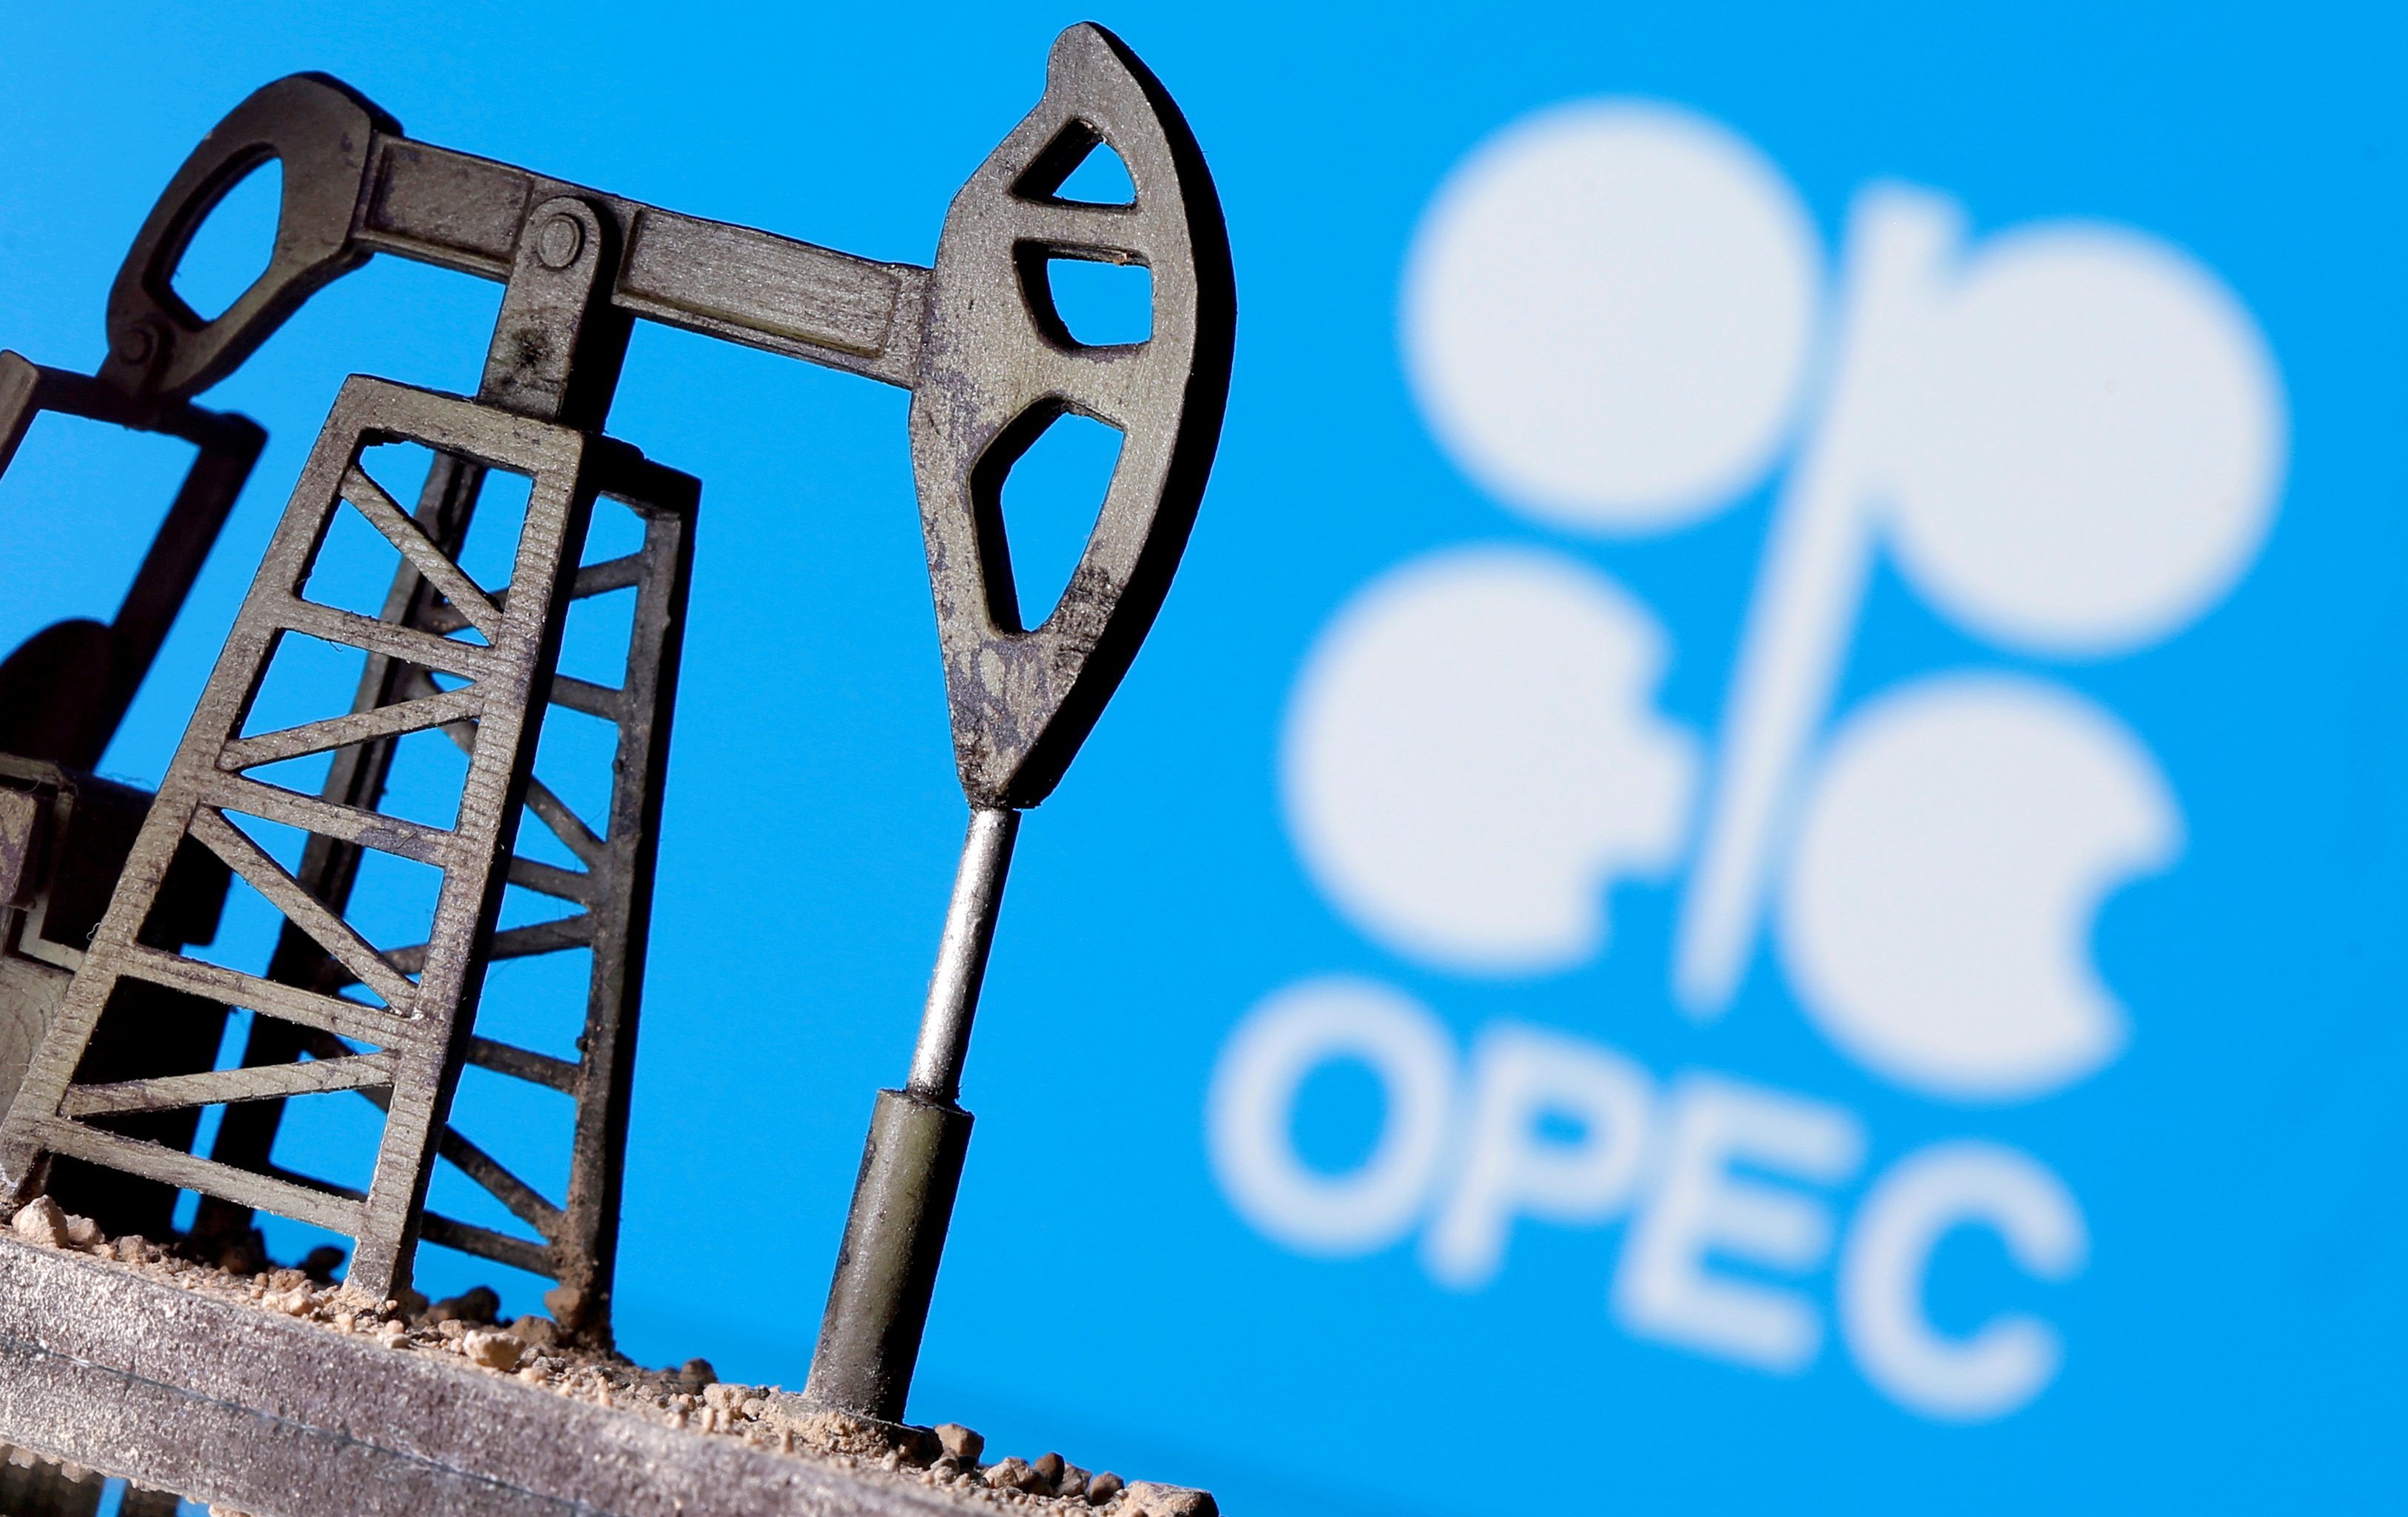 A 3D printed oil pump jack in front of the OPEC logo in this illustration picture